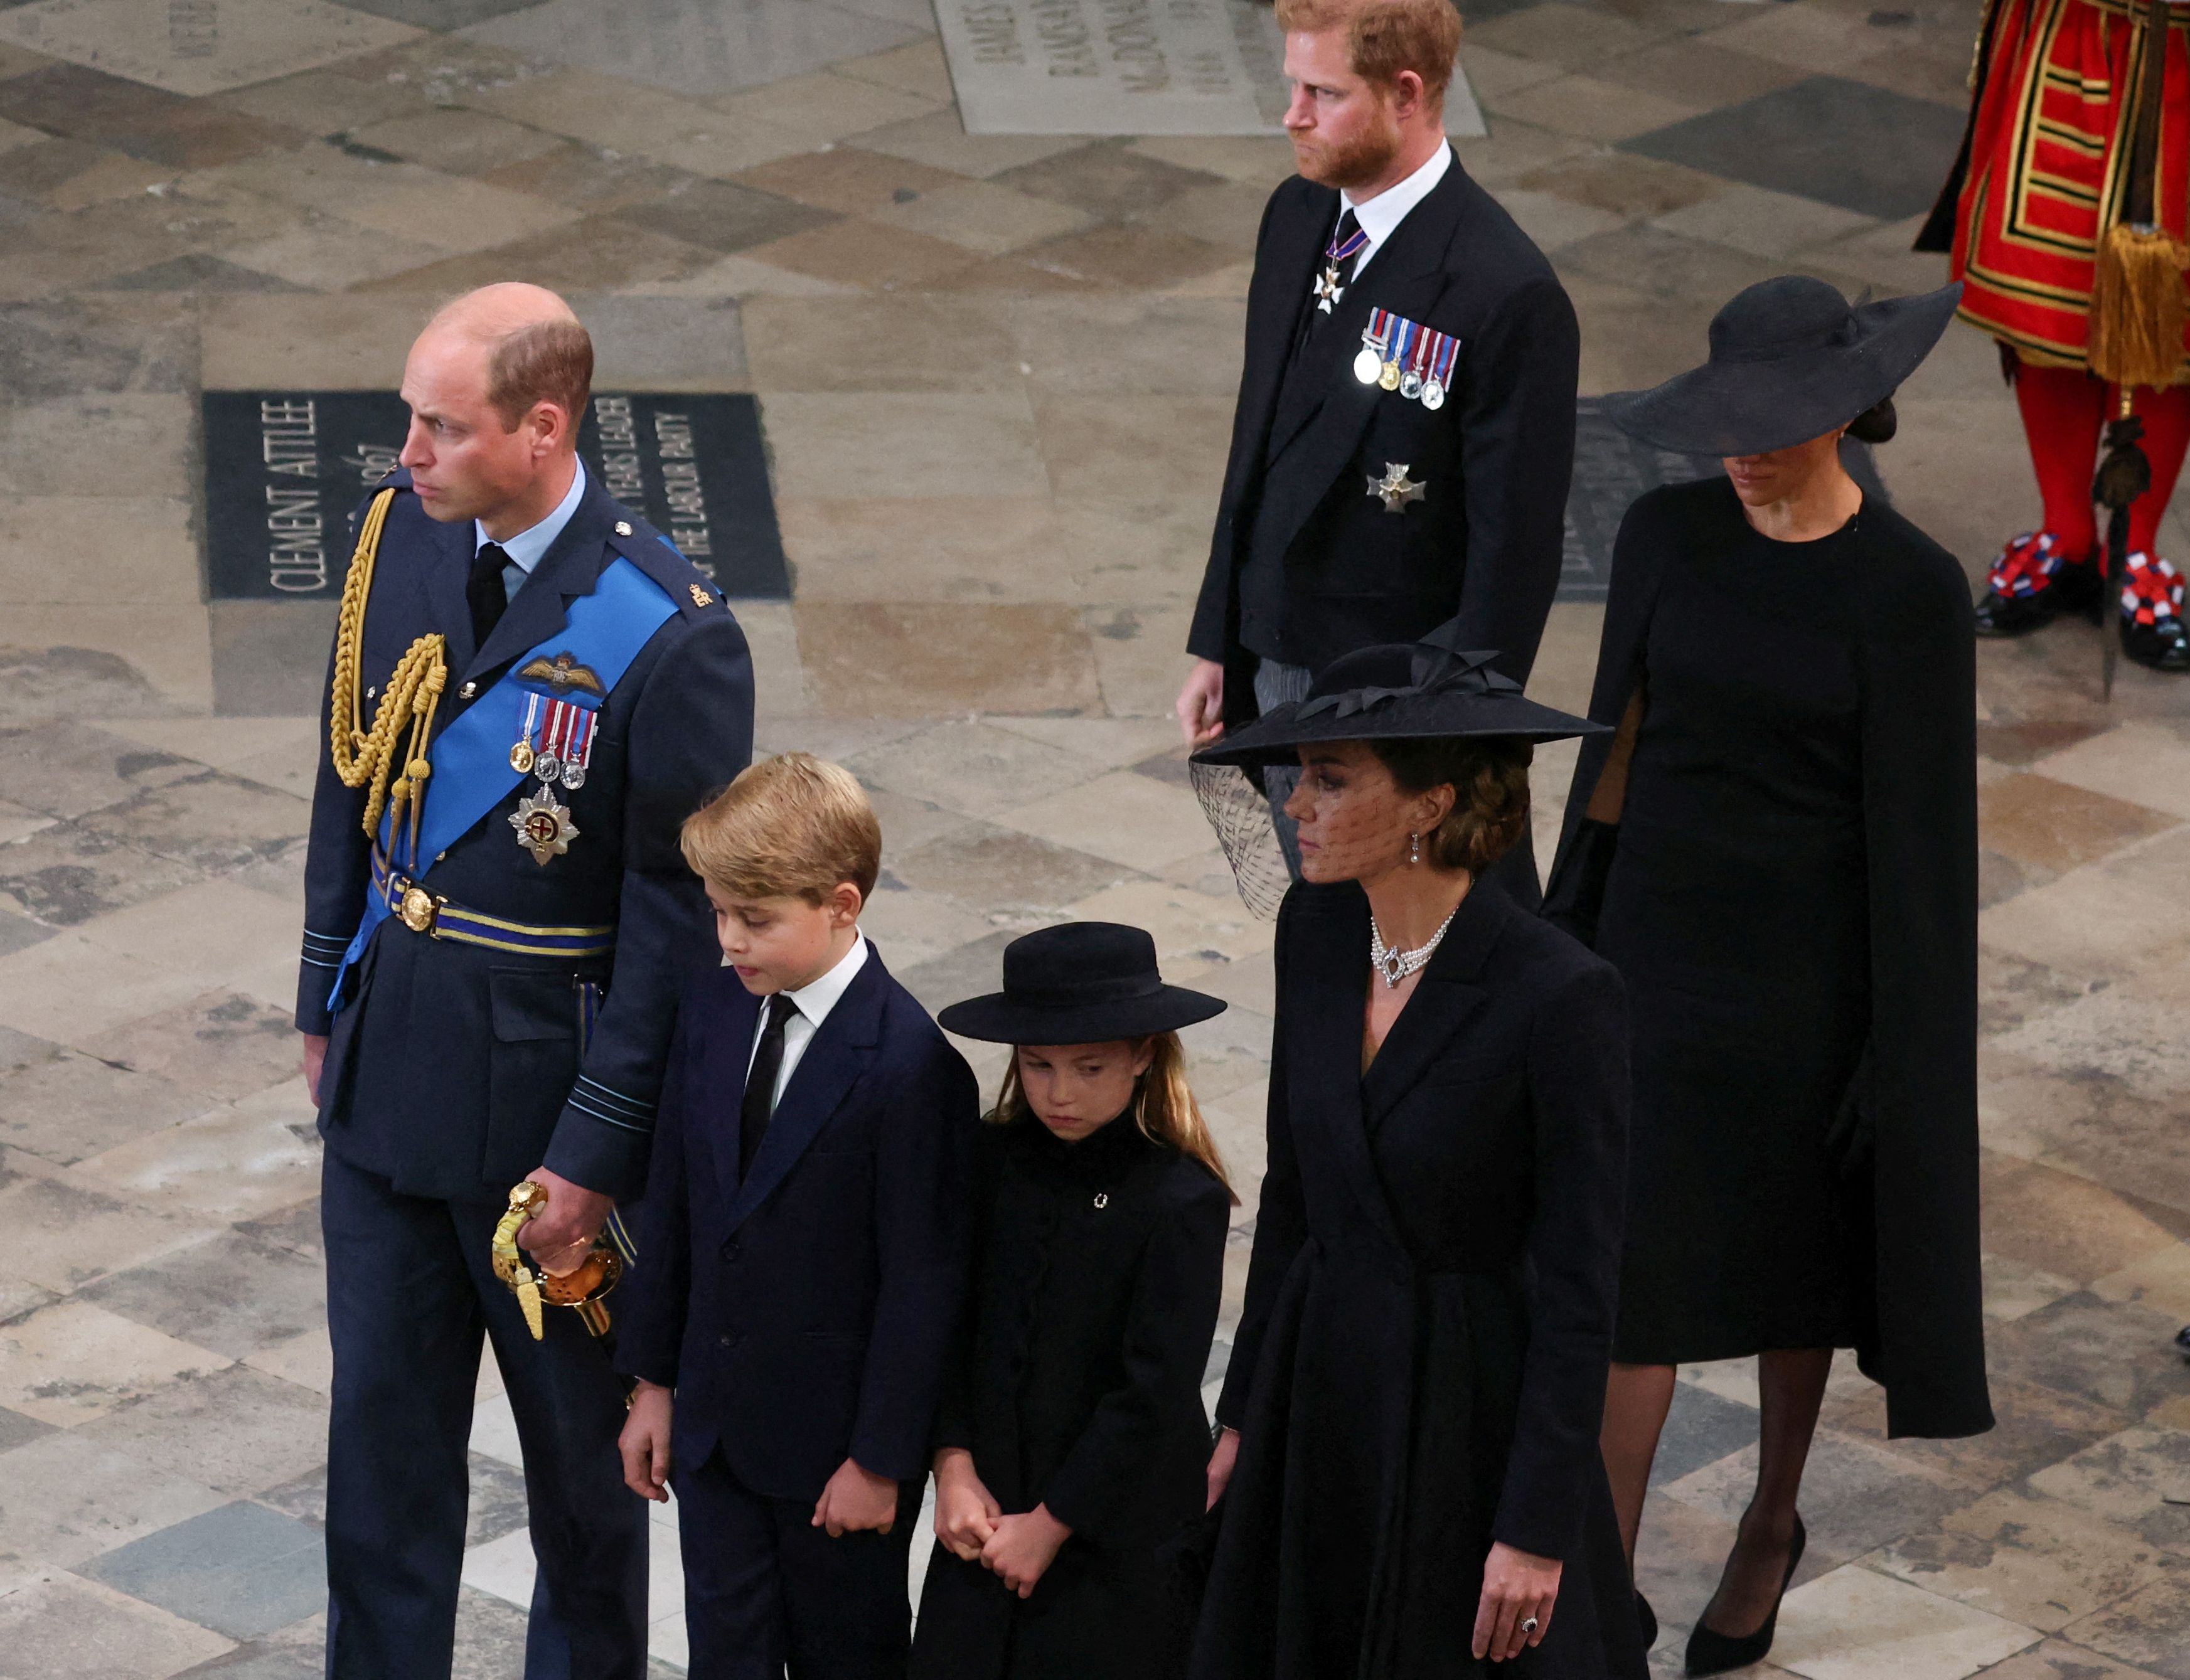 Prince William, Prince George, Princess Charlotte, Princess Kate, Prince Harry, and Duchess Meghan at the state funeral and burial of Queen Elizabeth II at Westminster Abbey in London, Britain, on September 19, 2022 | Source: Getty Images